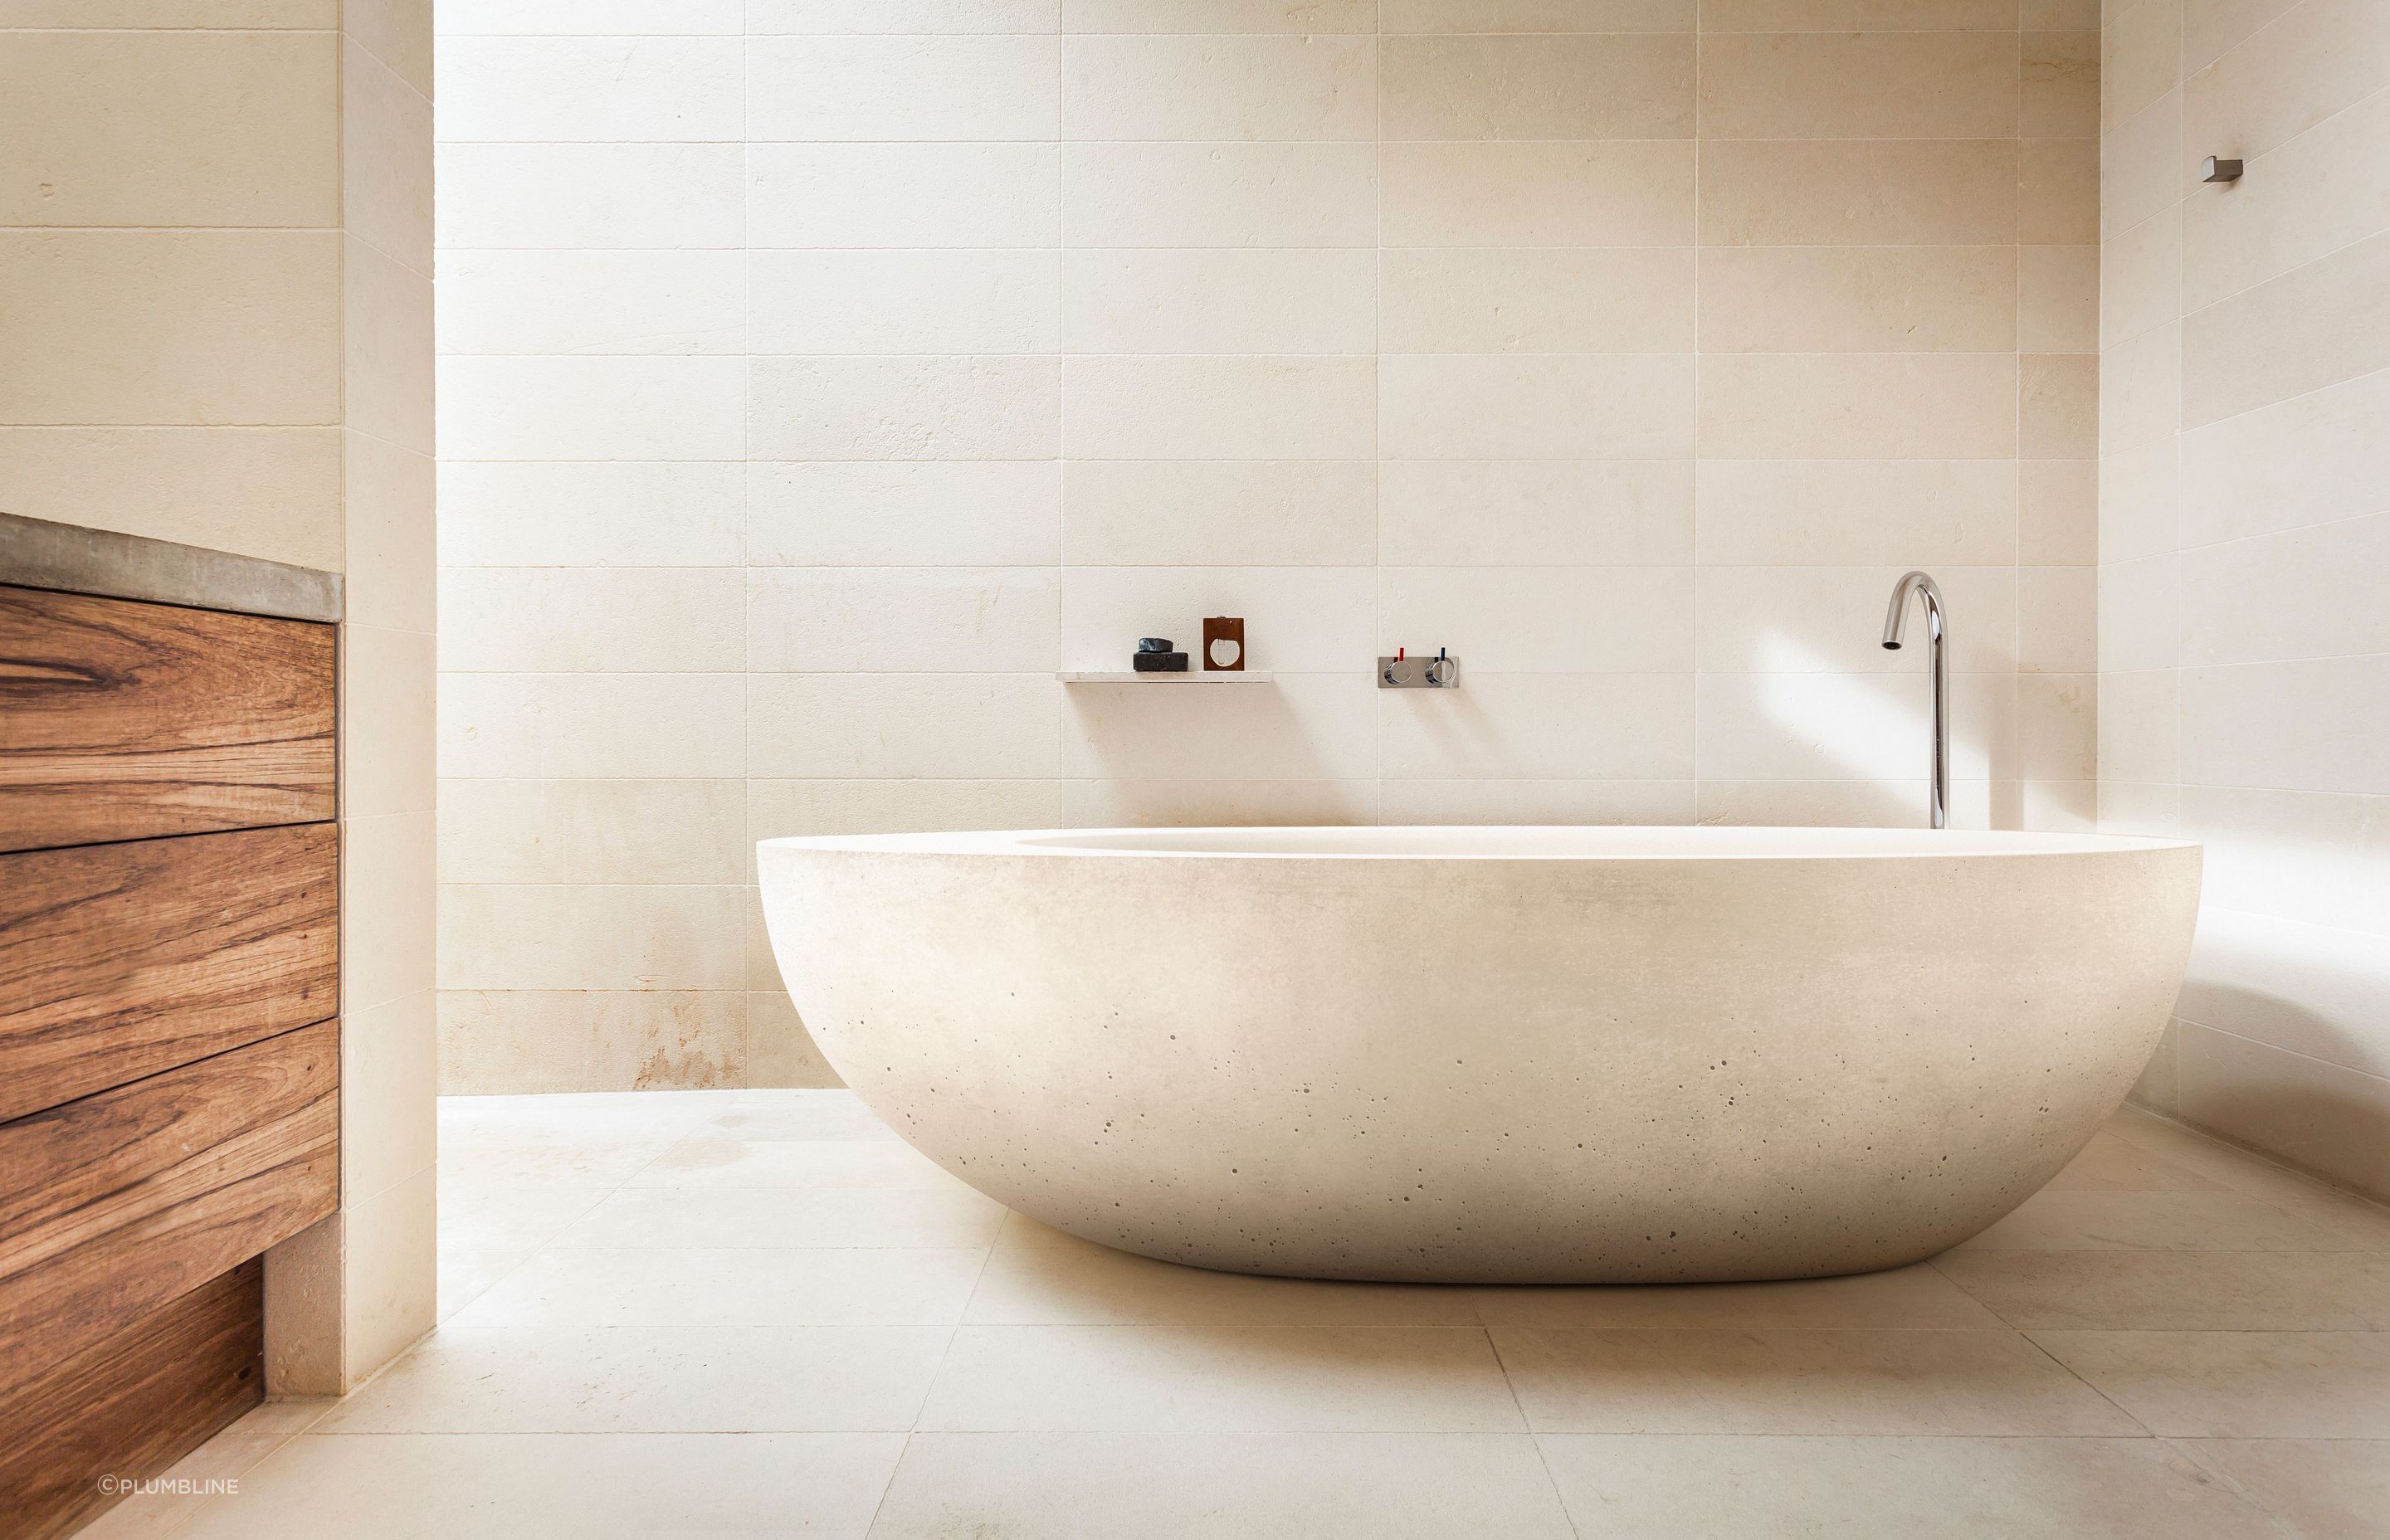 Baths come in all shapes and sizes with premium choices like the lavish Intra 1980 Freestanding Bath requiring ample space to do it justice